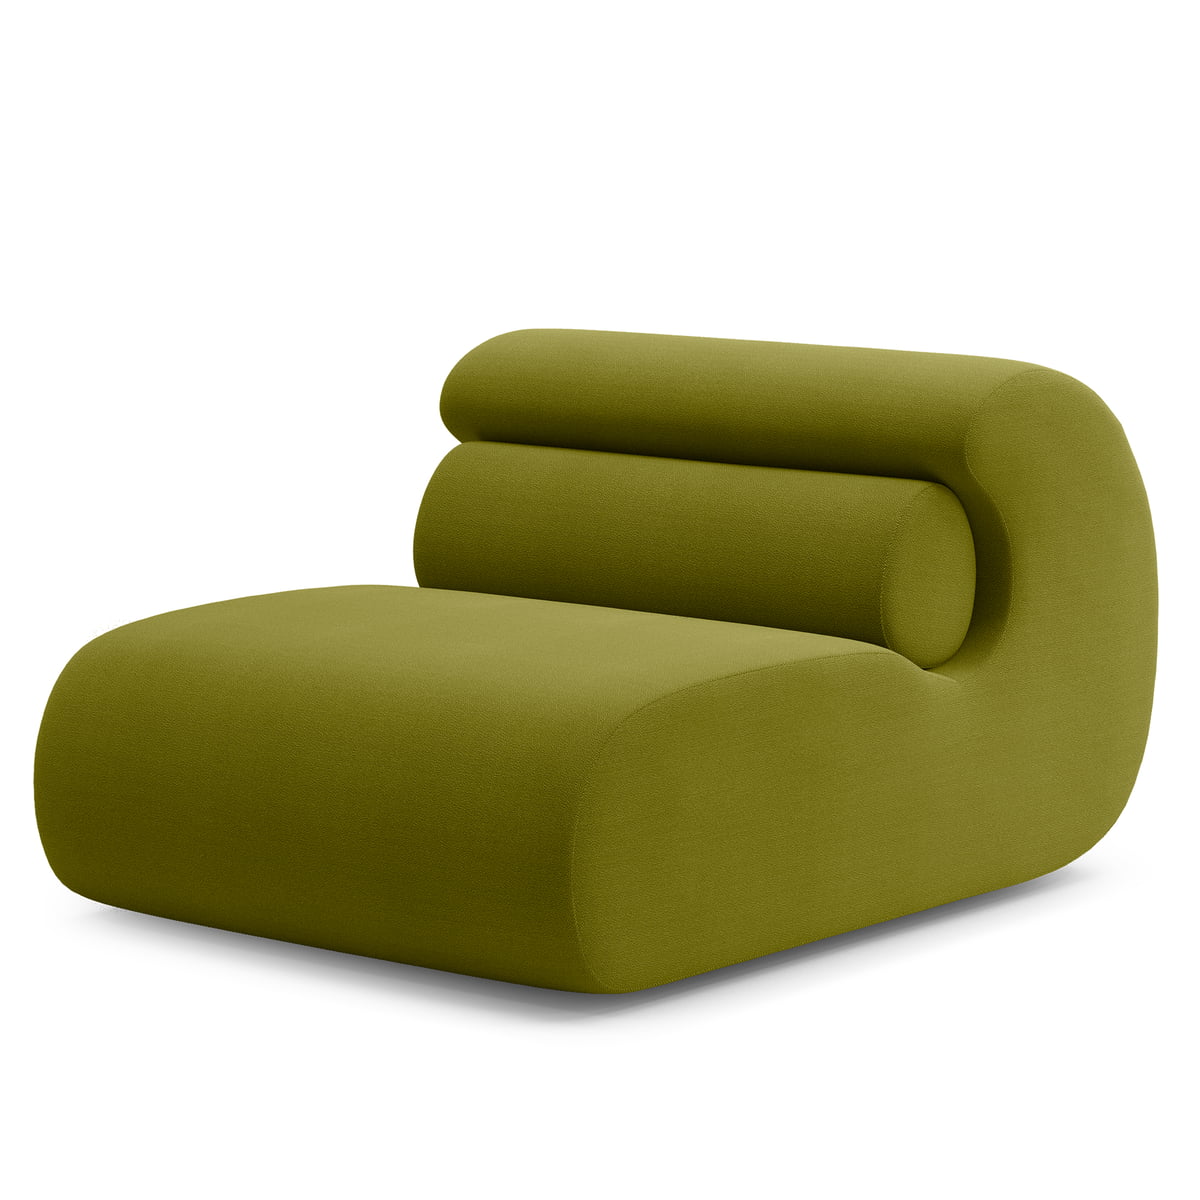 OUT Objekte unserer Tage - Ola Lounge Chair